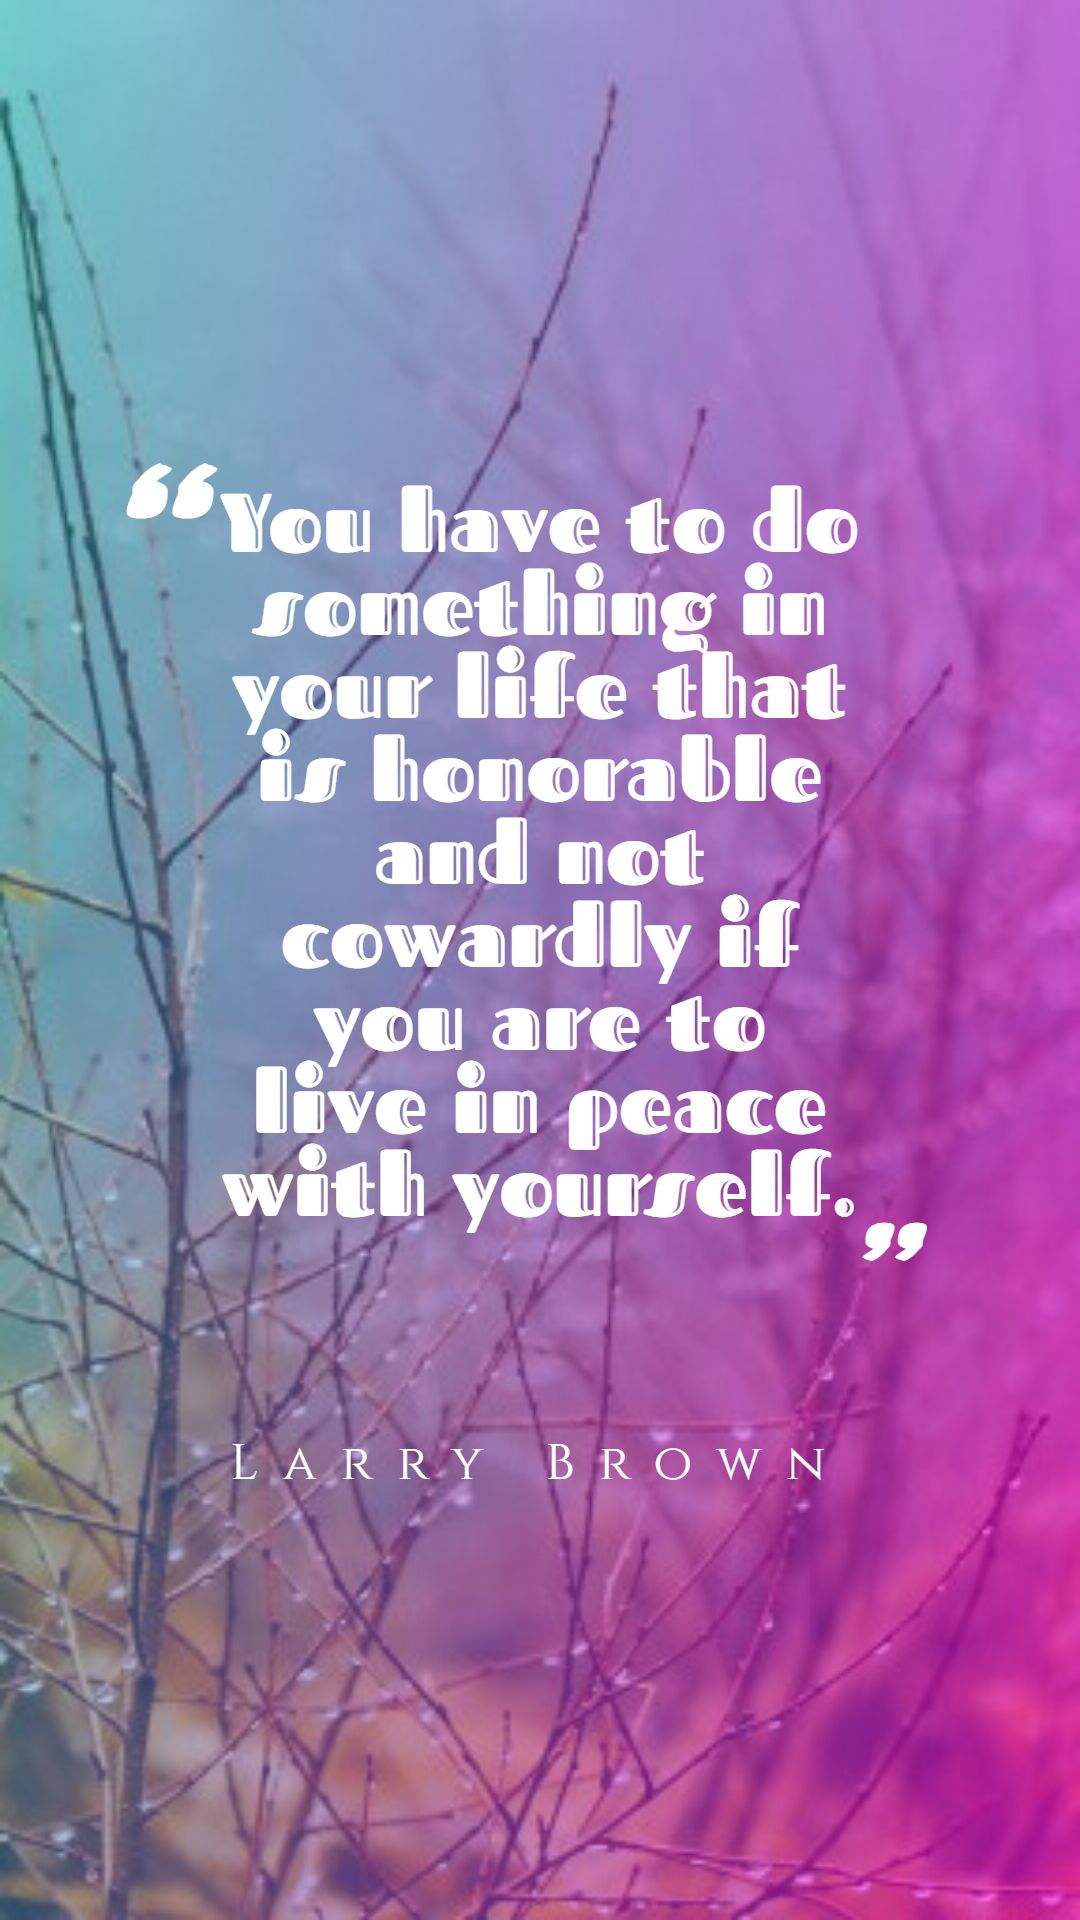 You have to do something in your life that is honorable and not cowardly if you are to live in peace with yourself.